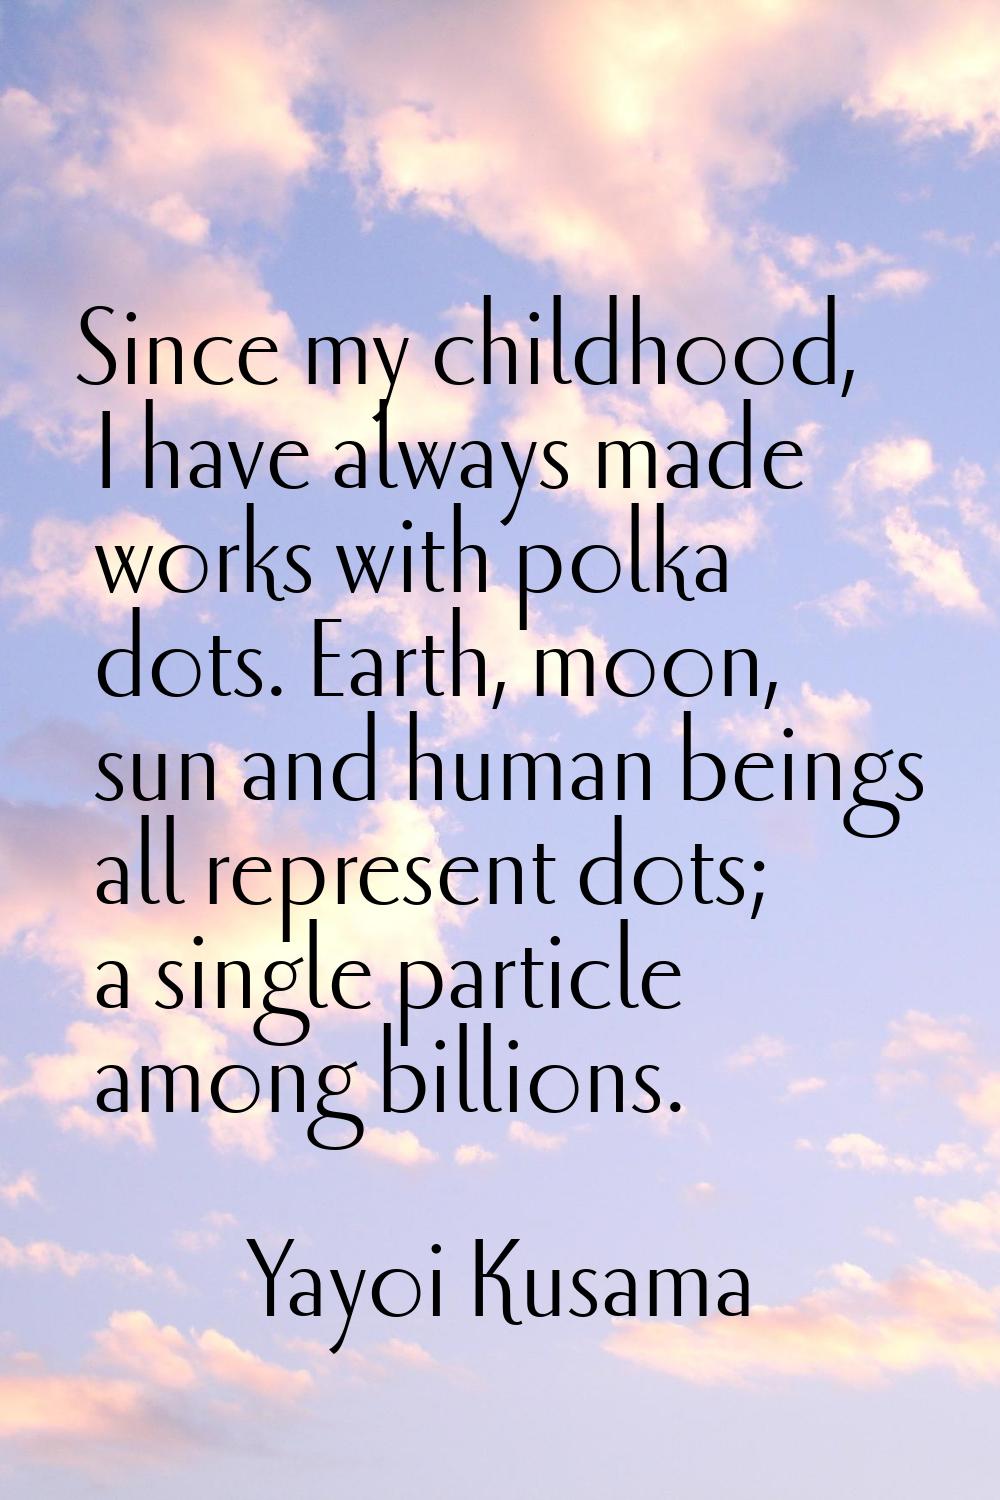 Since my childhood, I have always made works with polka dots. Earth, moon, sun and human beings all